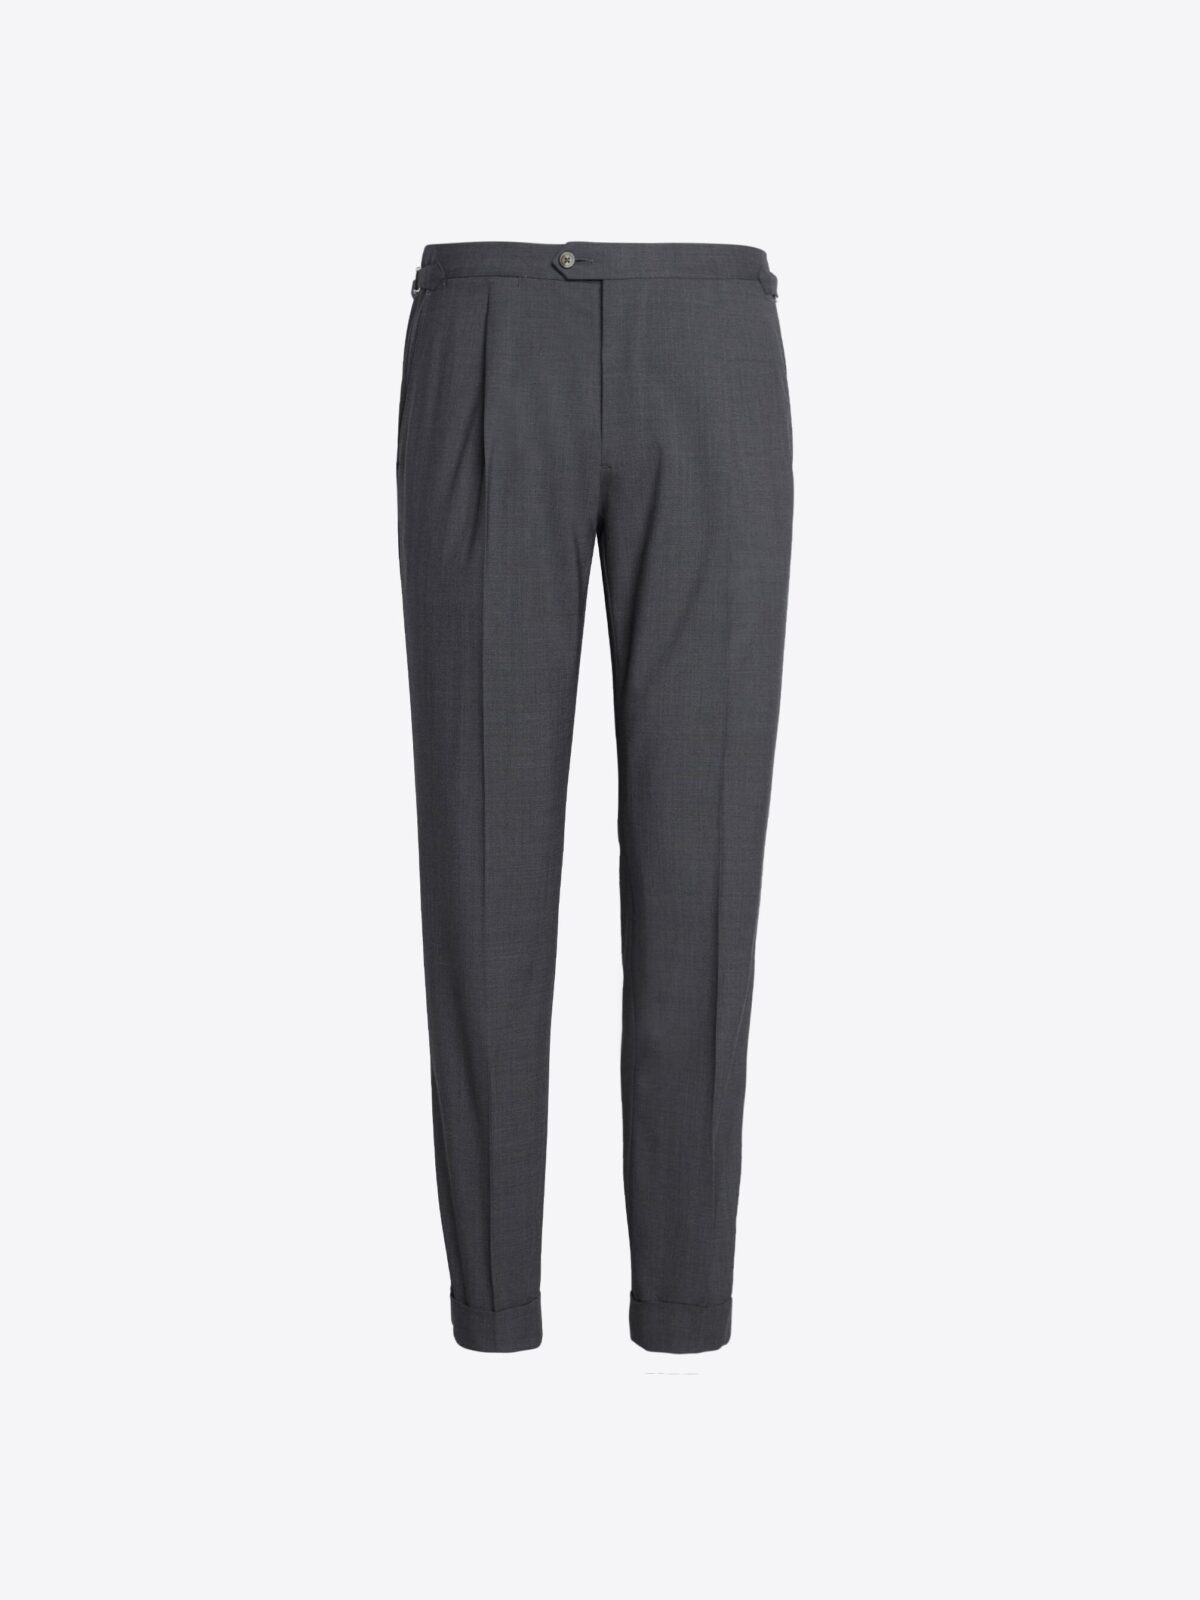 Allen Grey Stretch Wool Pleated Dress Pant - Custom Fit Tailored Clothing